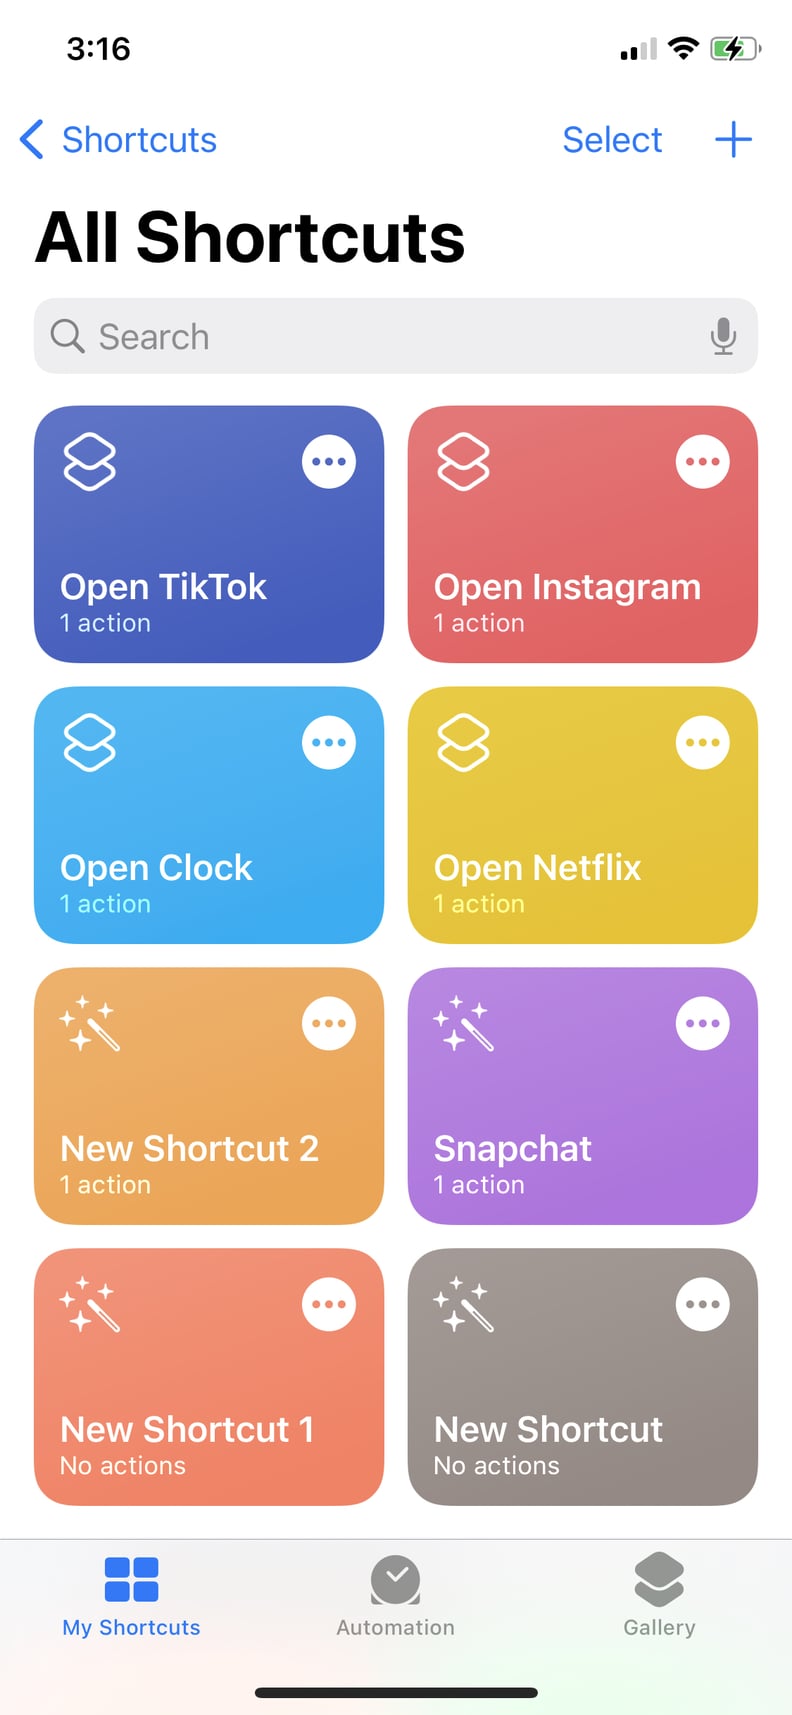 Open the "Shortcuts" App on Your iPhone